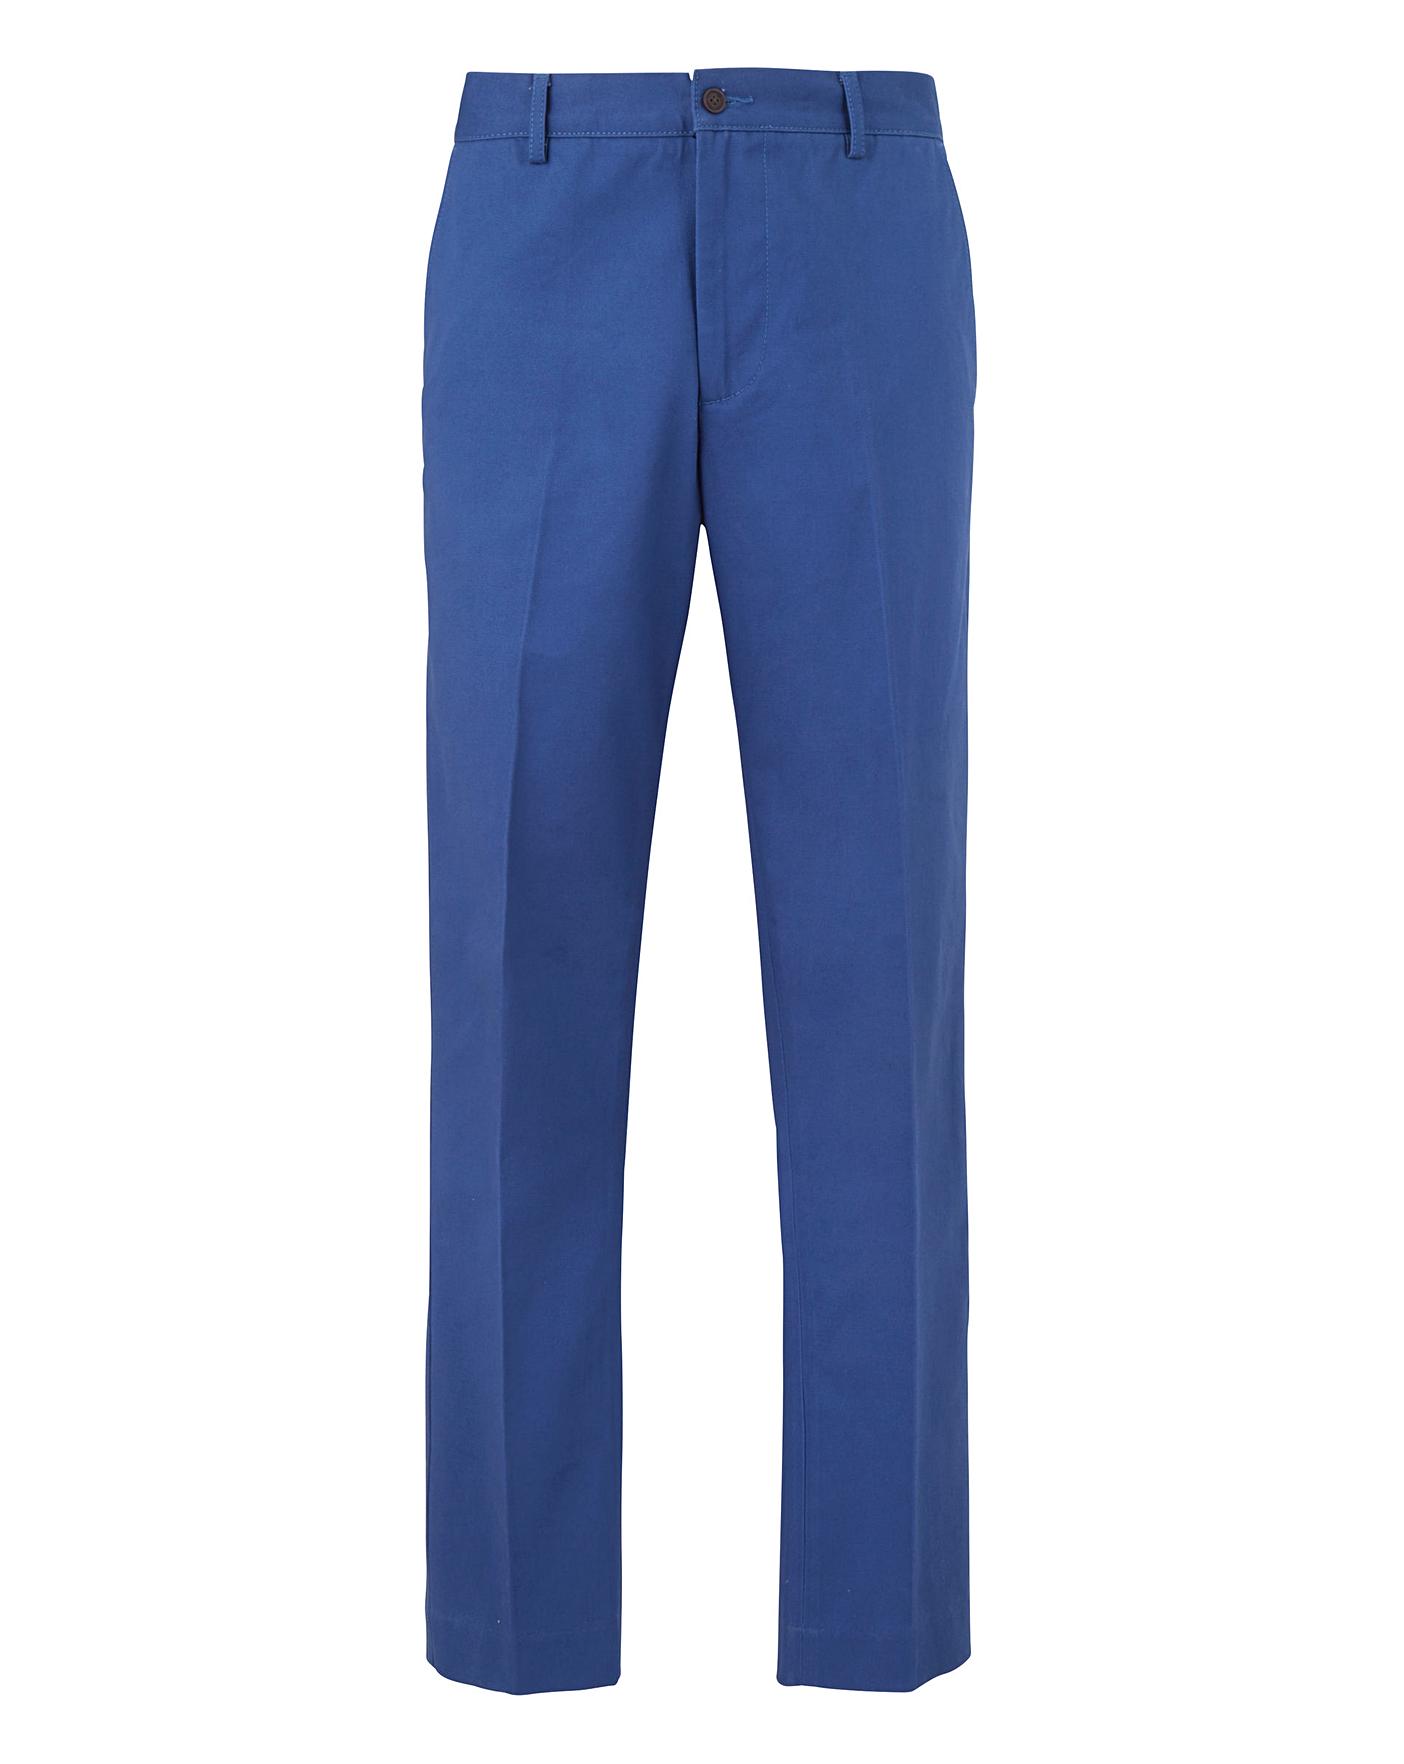 Harcourt Tapered Suit Trousers - Silver